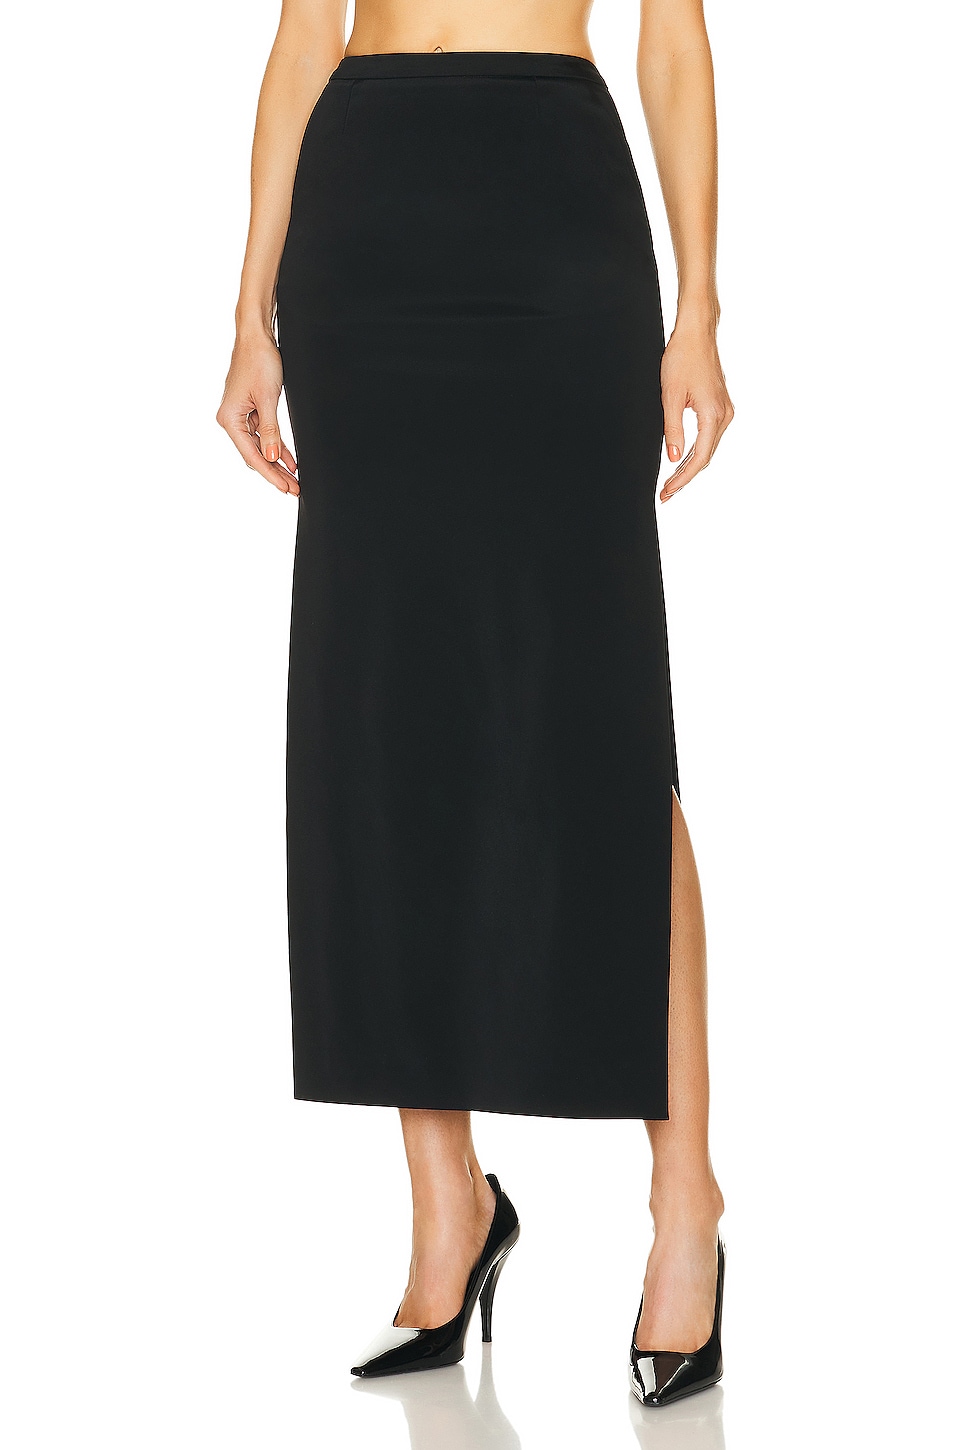 Image 1 of Dolce & Gabbana Cady Pencil Skirt in Nero